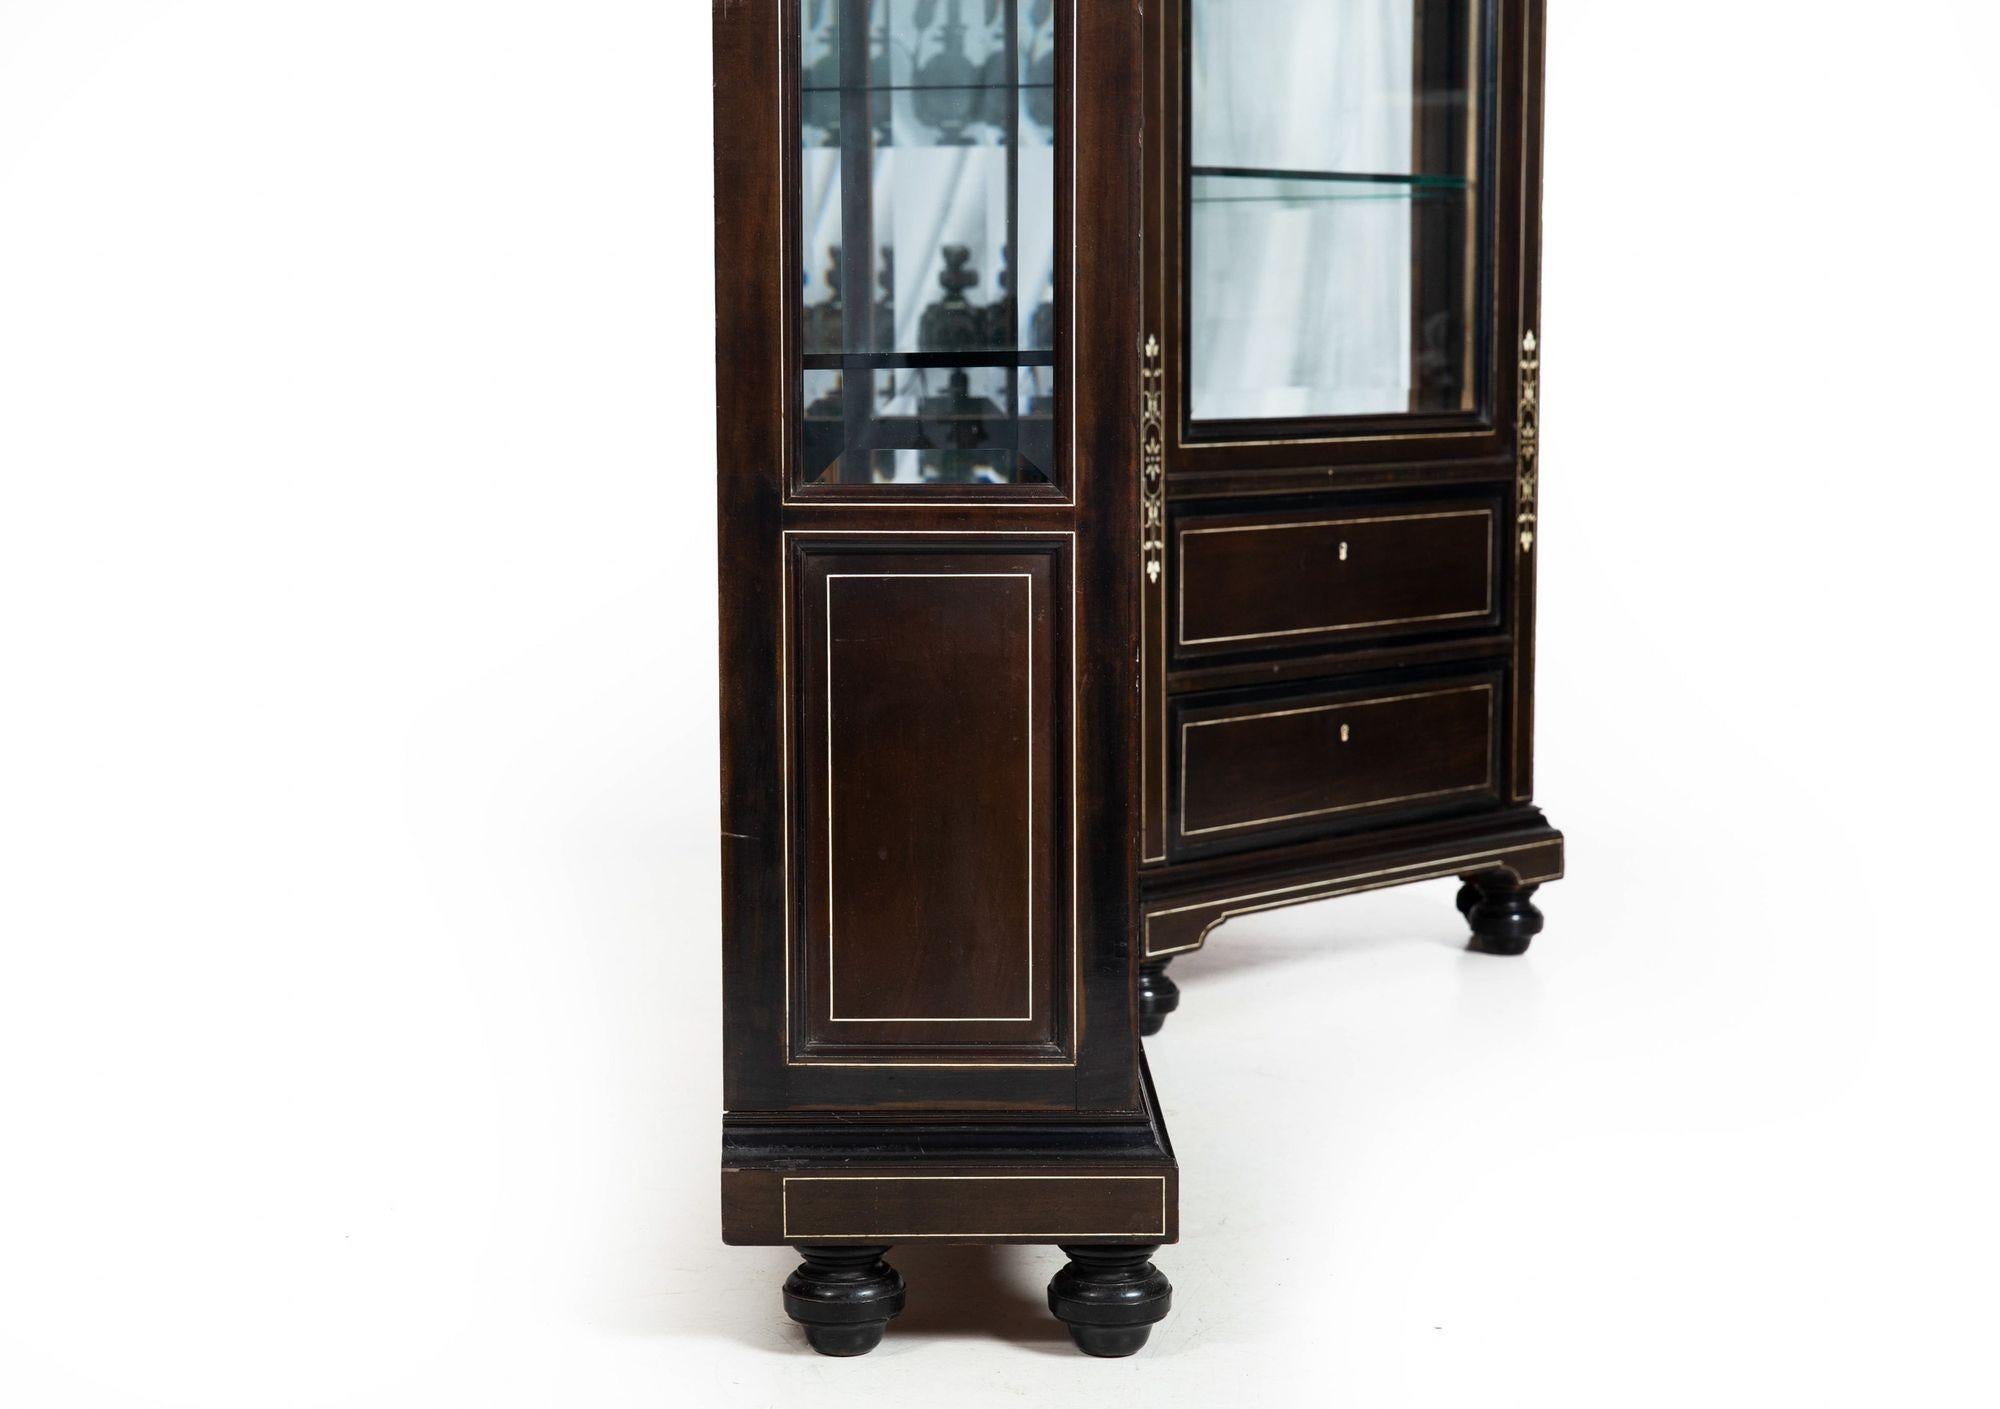 German Edwardian Ebony and Inlaid Two-Part Corner Display Cabinet circa 1900 For Sale 5